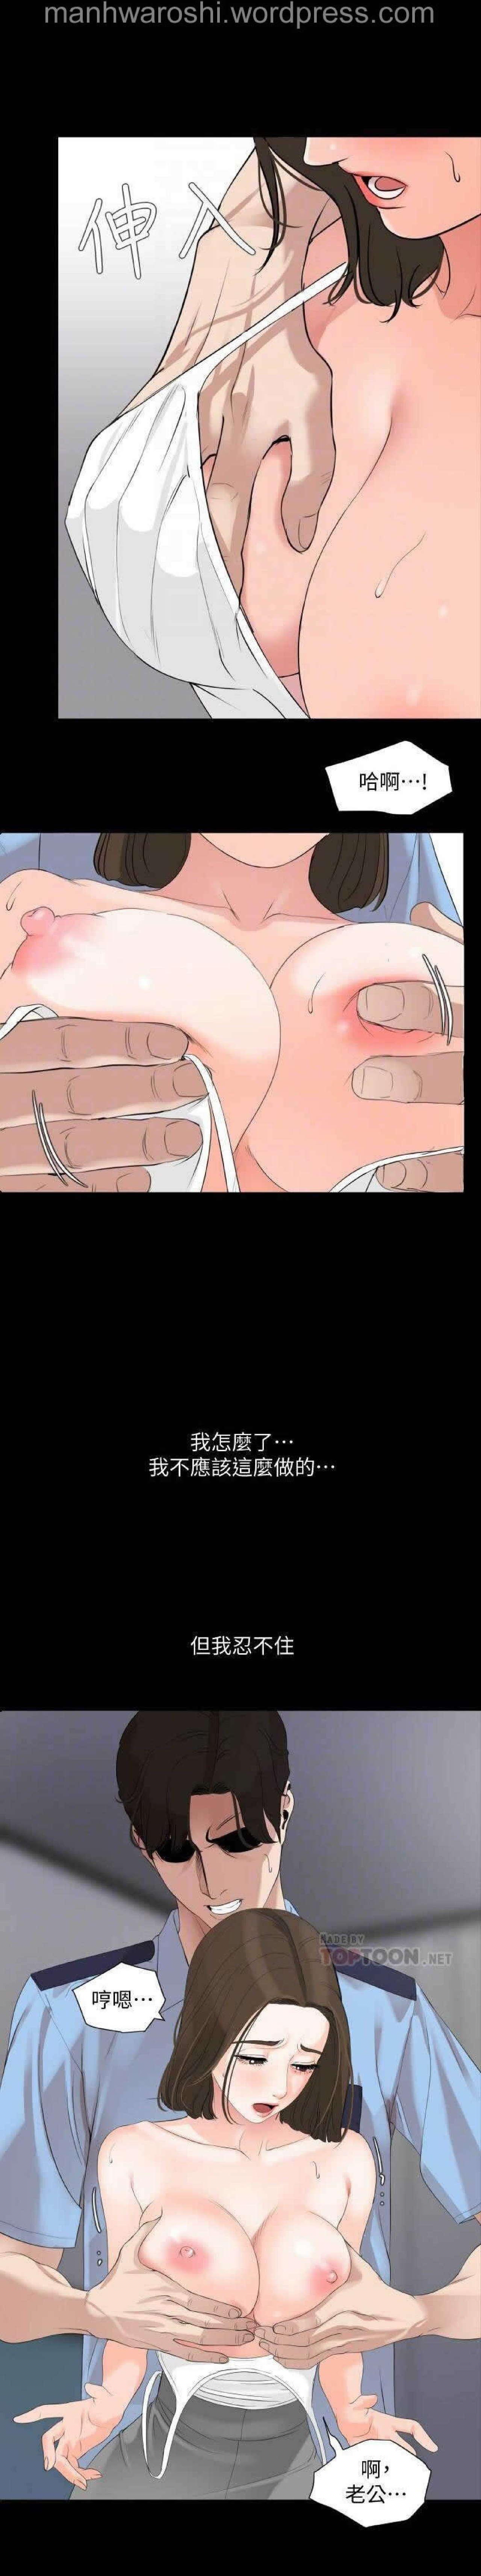 Don’t Be Like This! Son-In-Law | 与岳母同屋 第 7 [Chinese] Manhwa 11